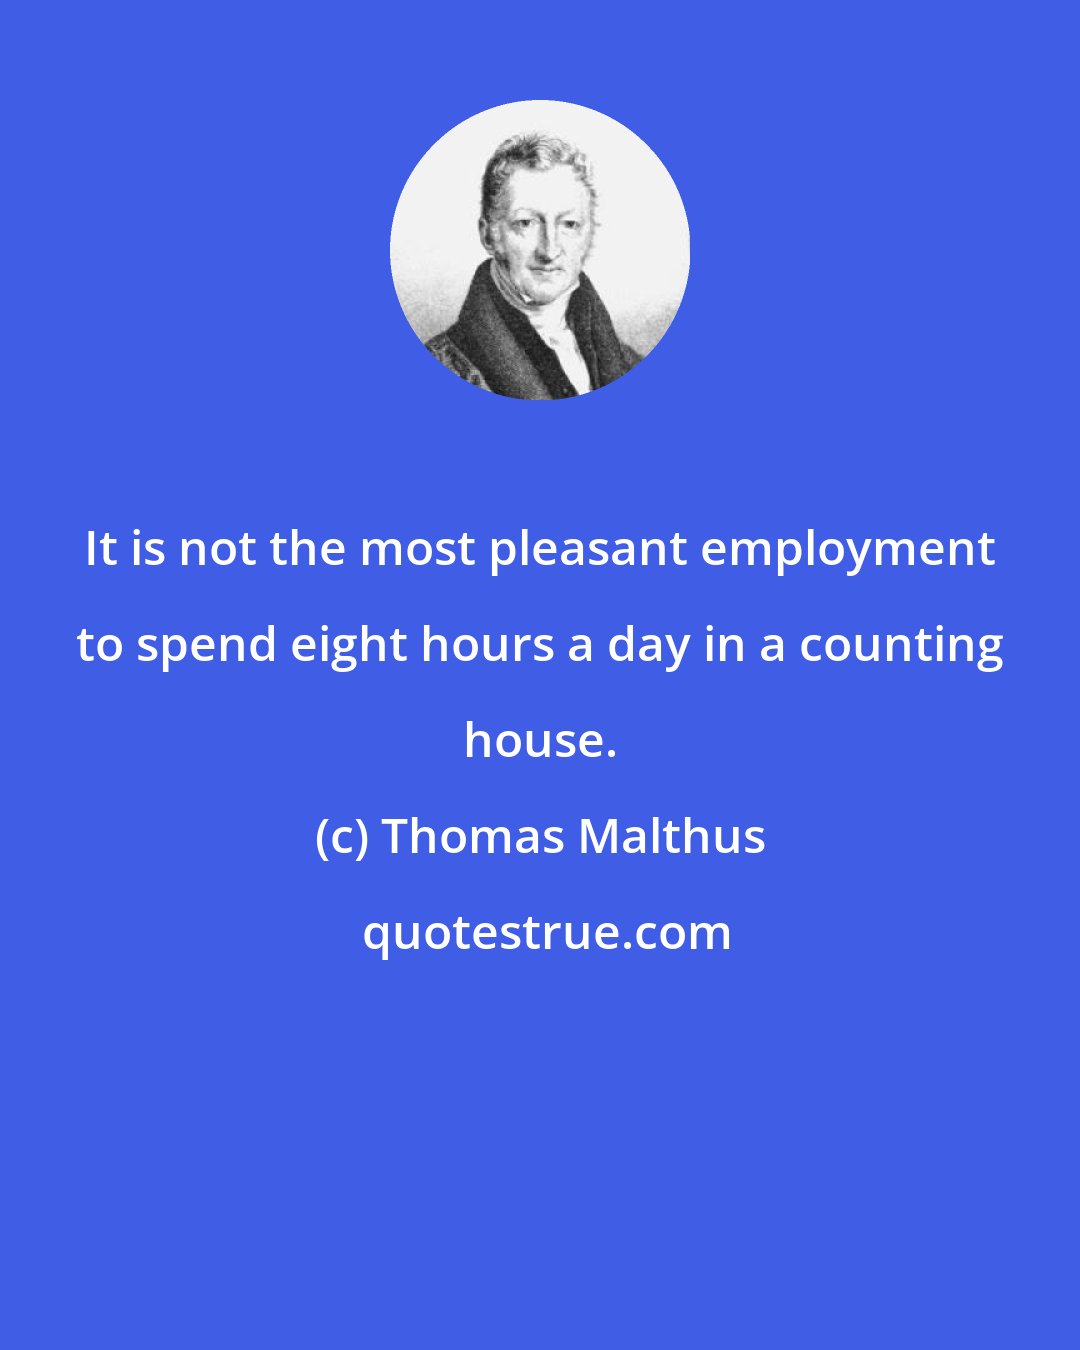 Thomas Malthus: It is not the most pleasant employment to spend eight hours a day in a counting house.